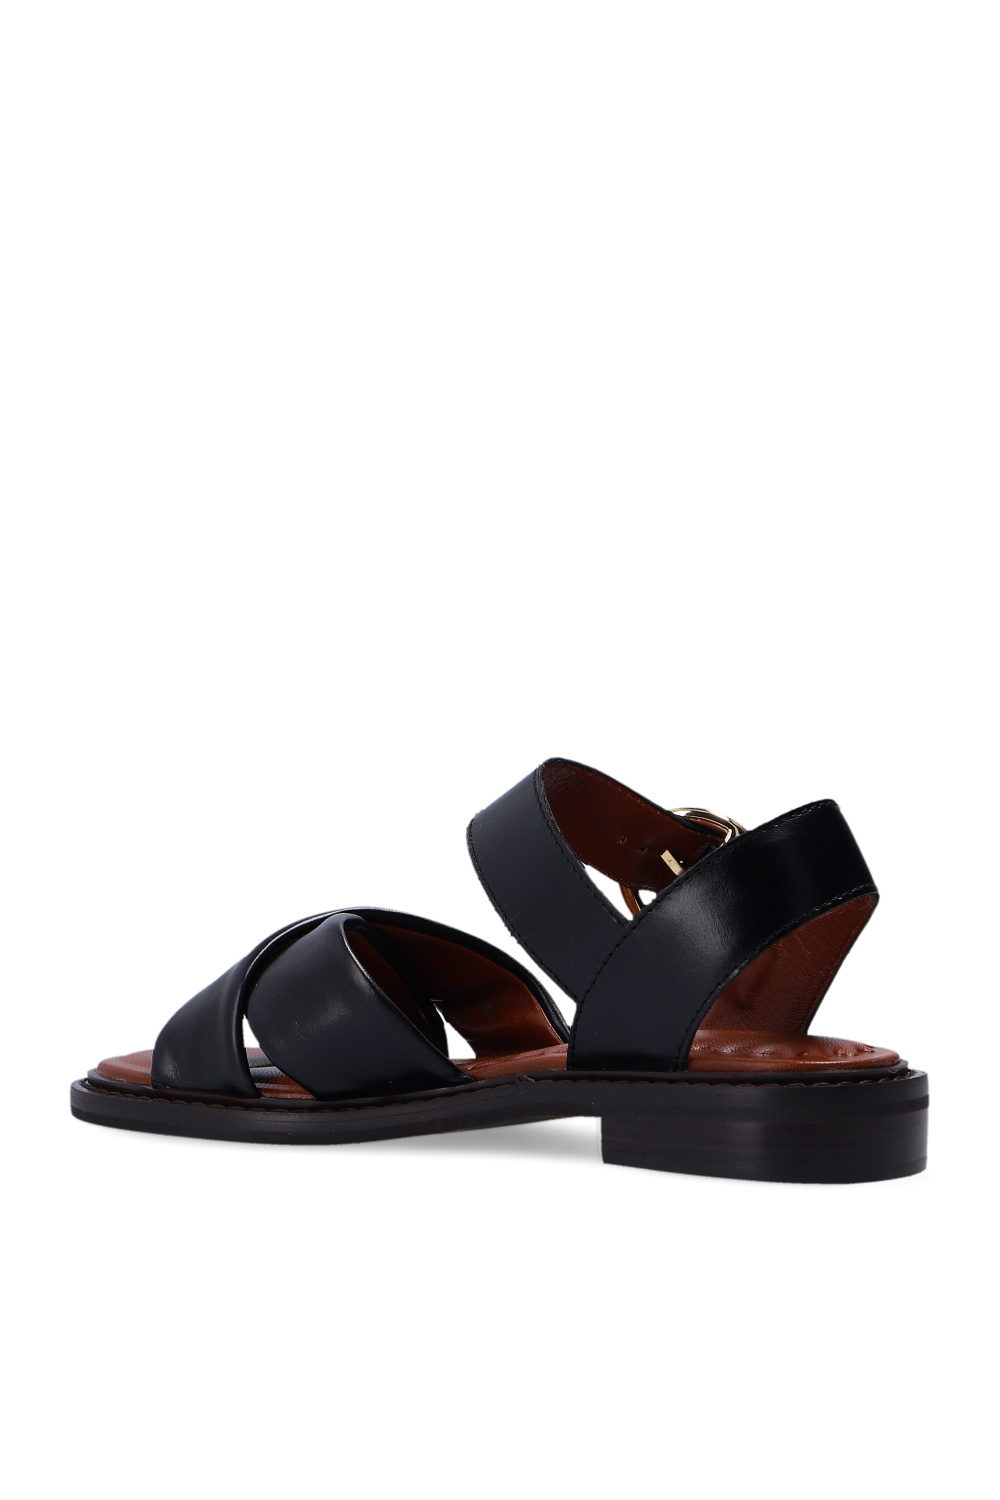 See By Chloe Lyna Sandals - www.inf-inet.com